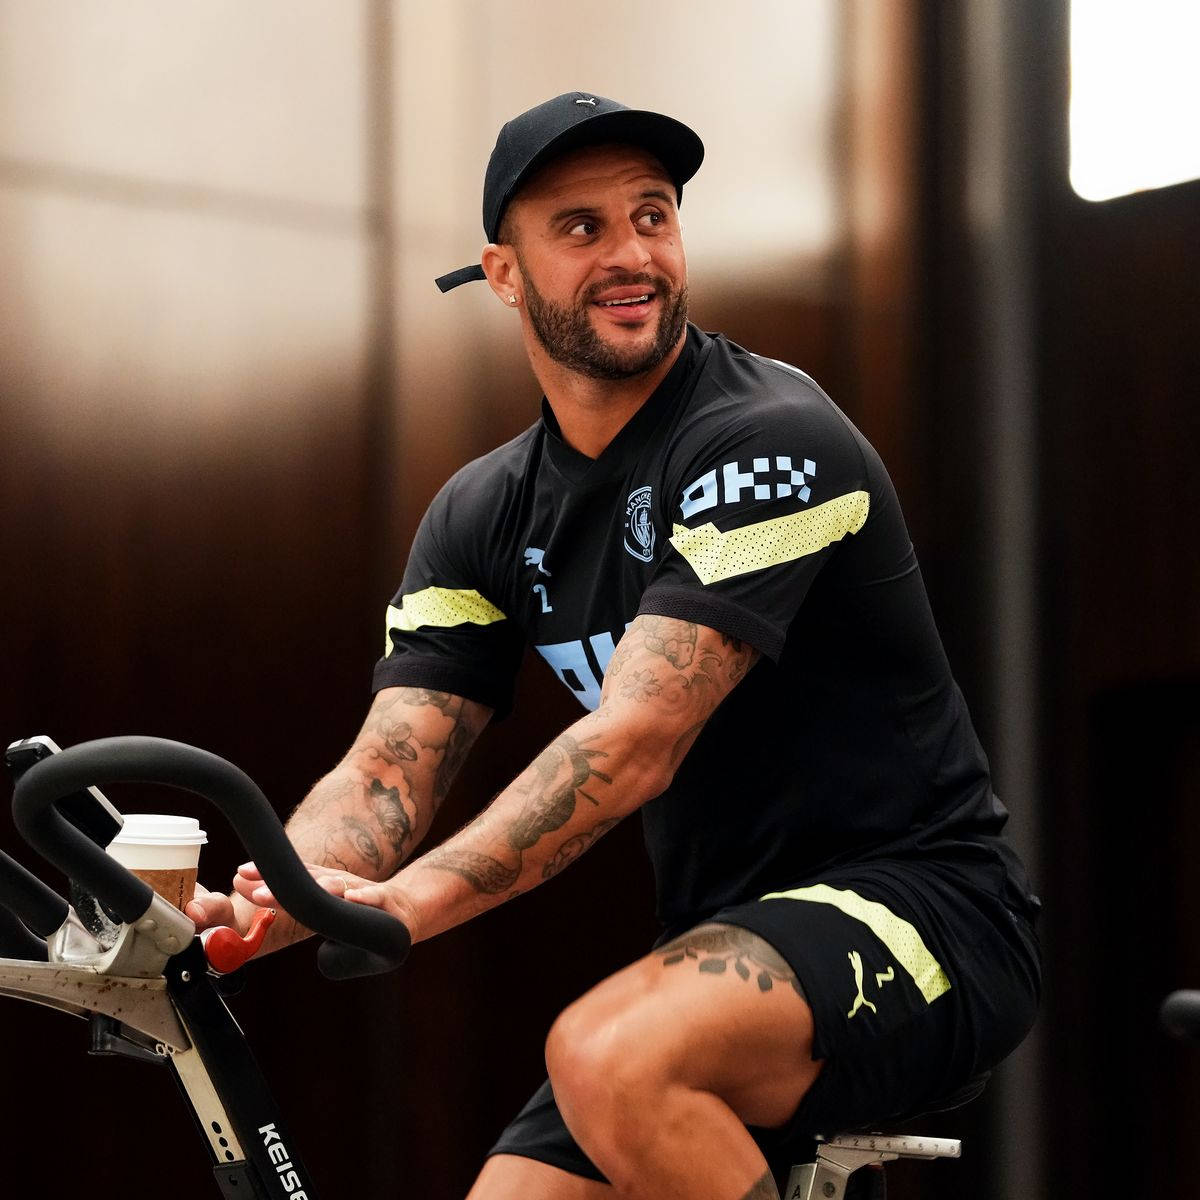 Kyle Walker Riding Stationary Bicyle Wallpaper